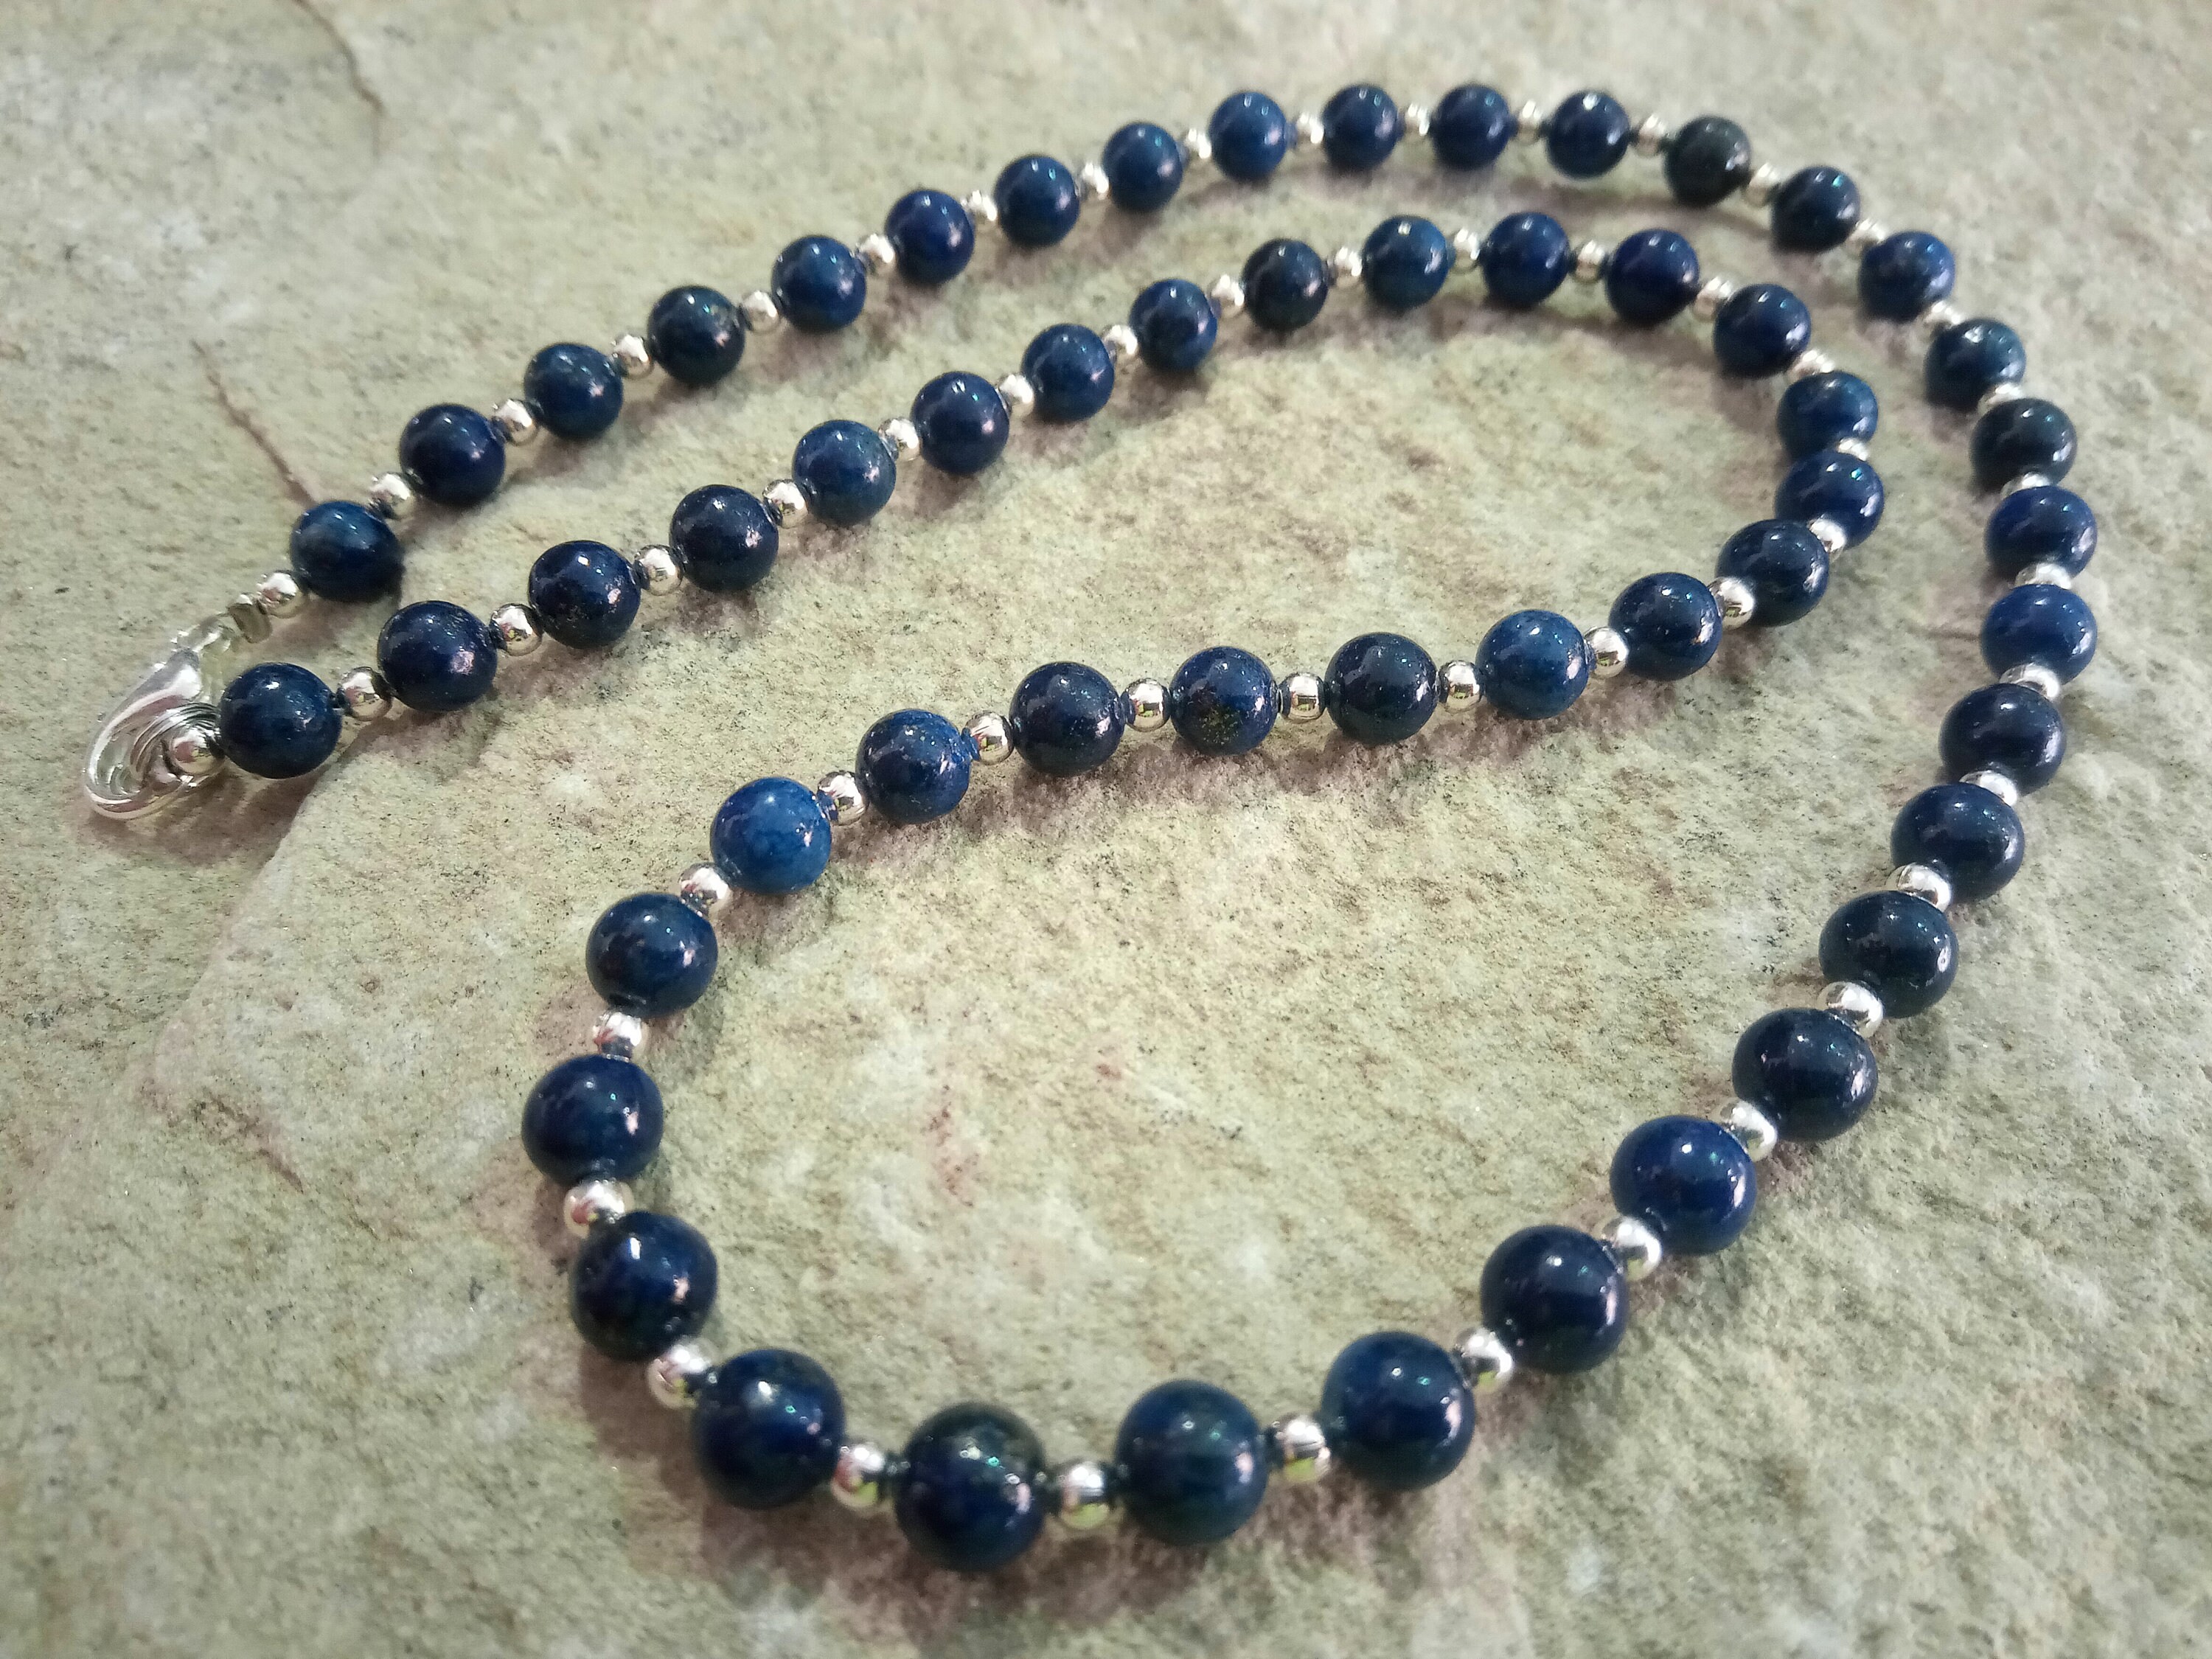 Lapis lazuli chain 6 mm different Lengths selectable 002 | Etsy